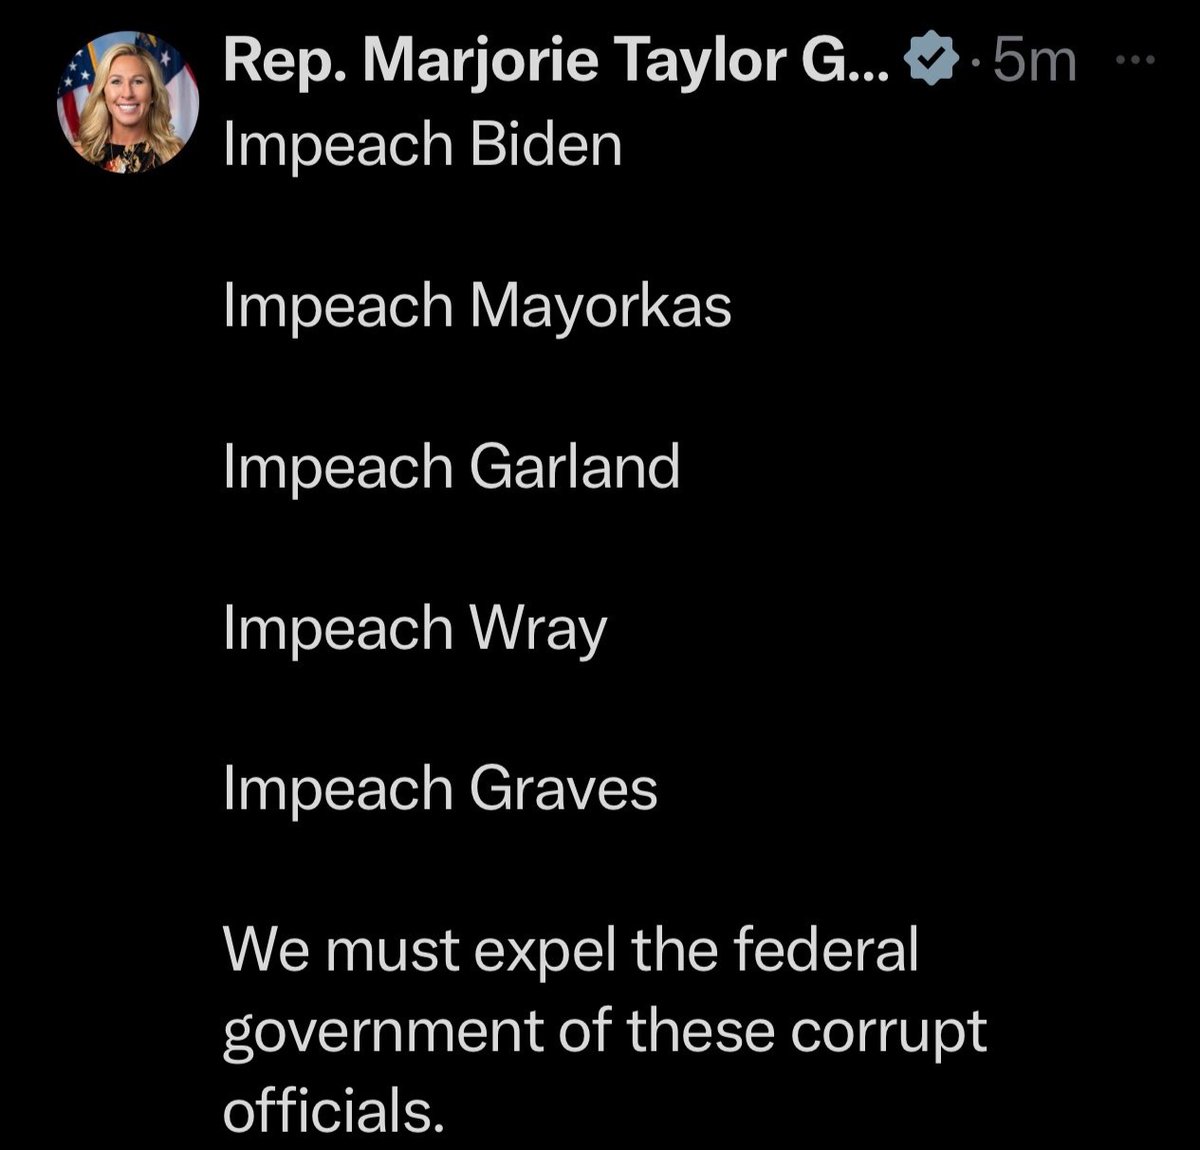 OMG YES @RepMTG! Let's impeach! Impeach Jordan Impeach Gaetz We must expel the federal government of these insurrectionists. Impeach Trump. Impeach Rudy. Impeach all churches who bash LGBT people while grooming kids. Because if we're around throwing 'Impeach' like candy,